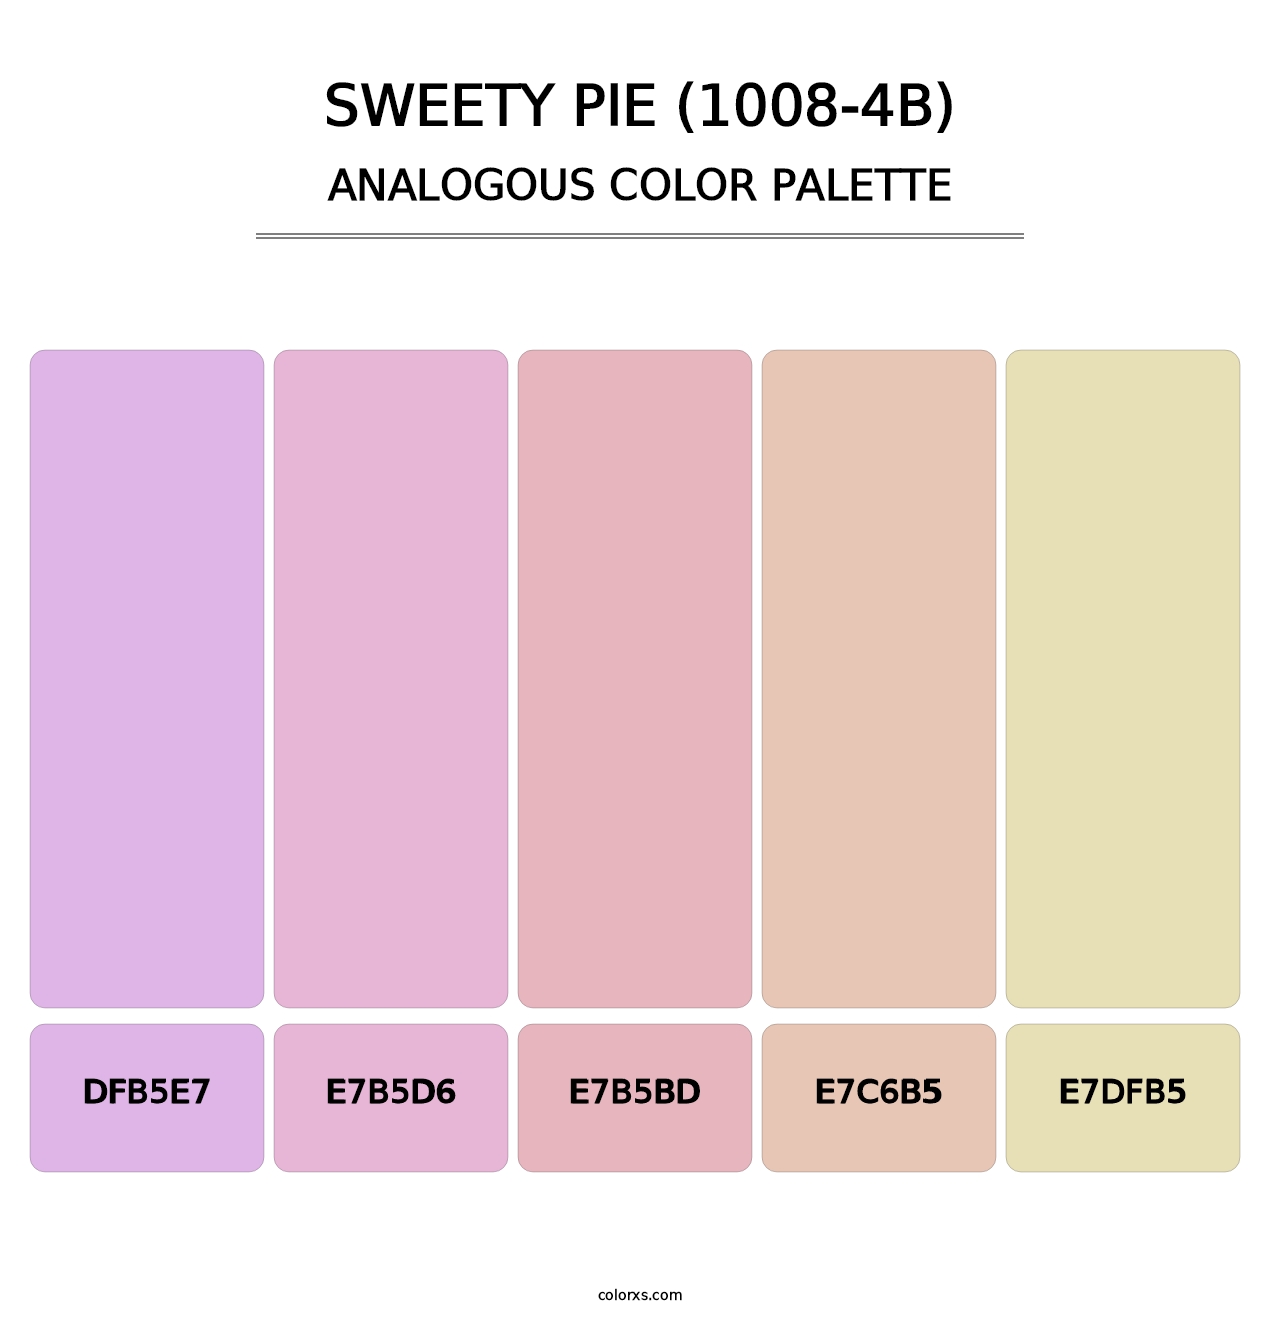 Sweety Pie (1008-4B) - Analogous Color Palette